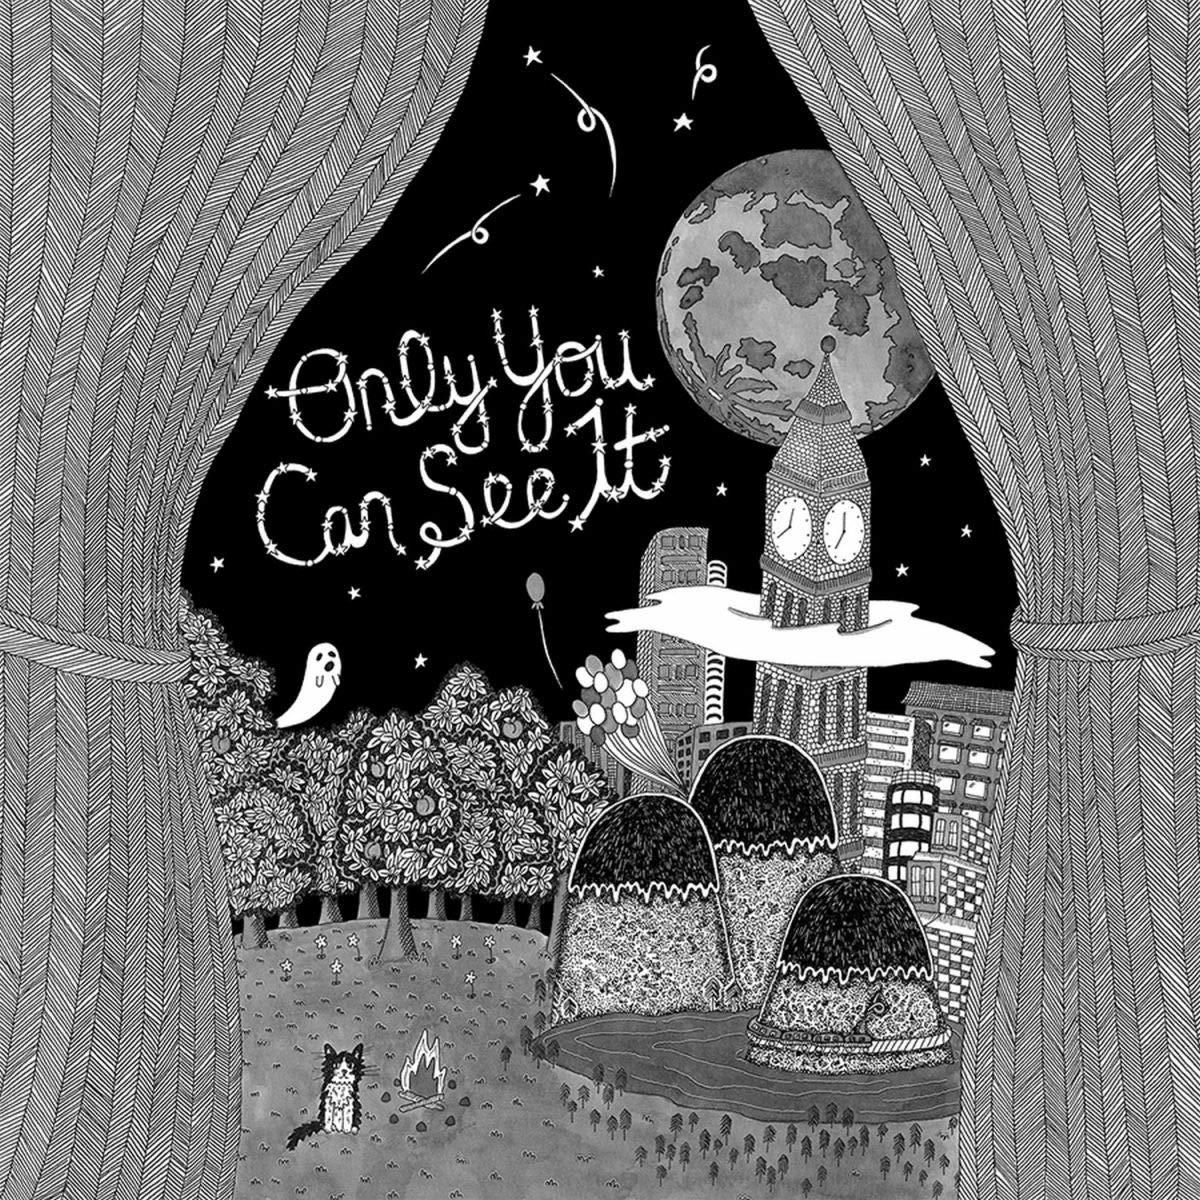 Emily Reo It Can You Only (LP + - Download) See 